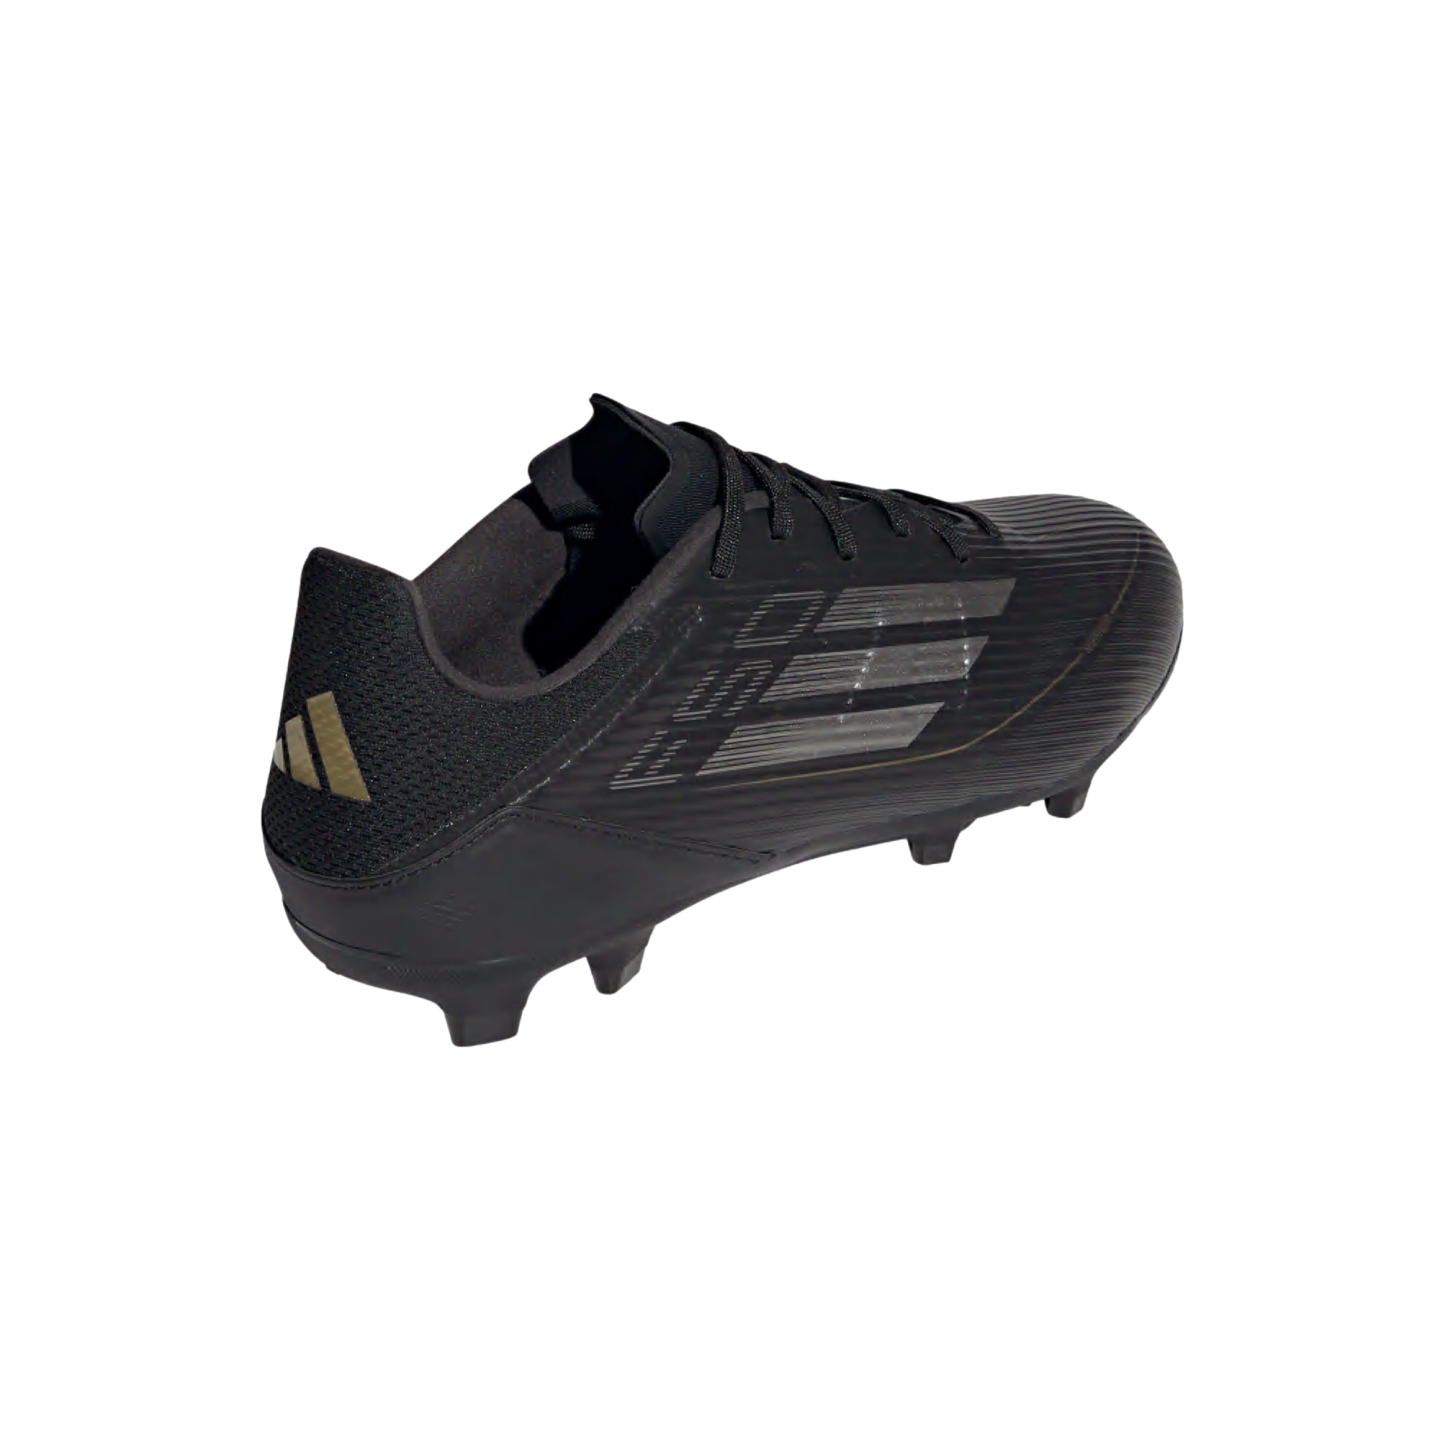 Adidas F50 League Firm Ground Cleats